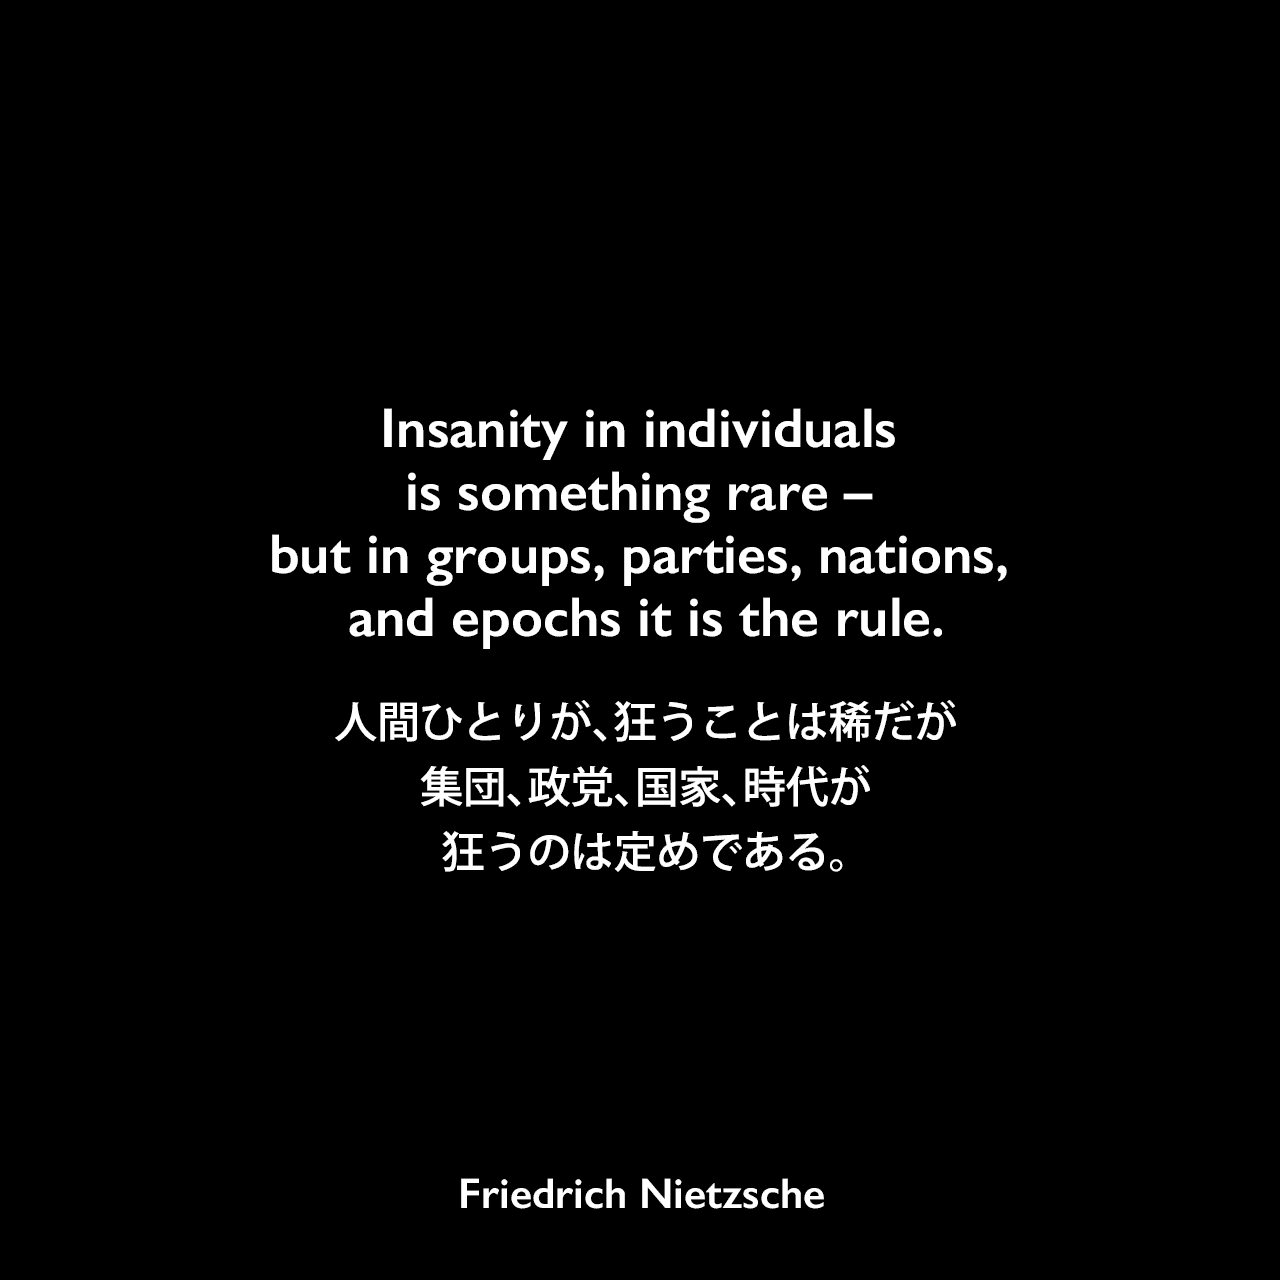 Insanity in individuals is something rare – but in groups, parties, nations, and epochs it is the rule.人間ひとりが、狂うことは稀だが、集団、政党、国家、時代が狂うのは定めである。Friedrich Nietzsche